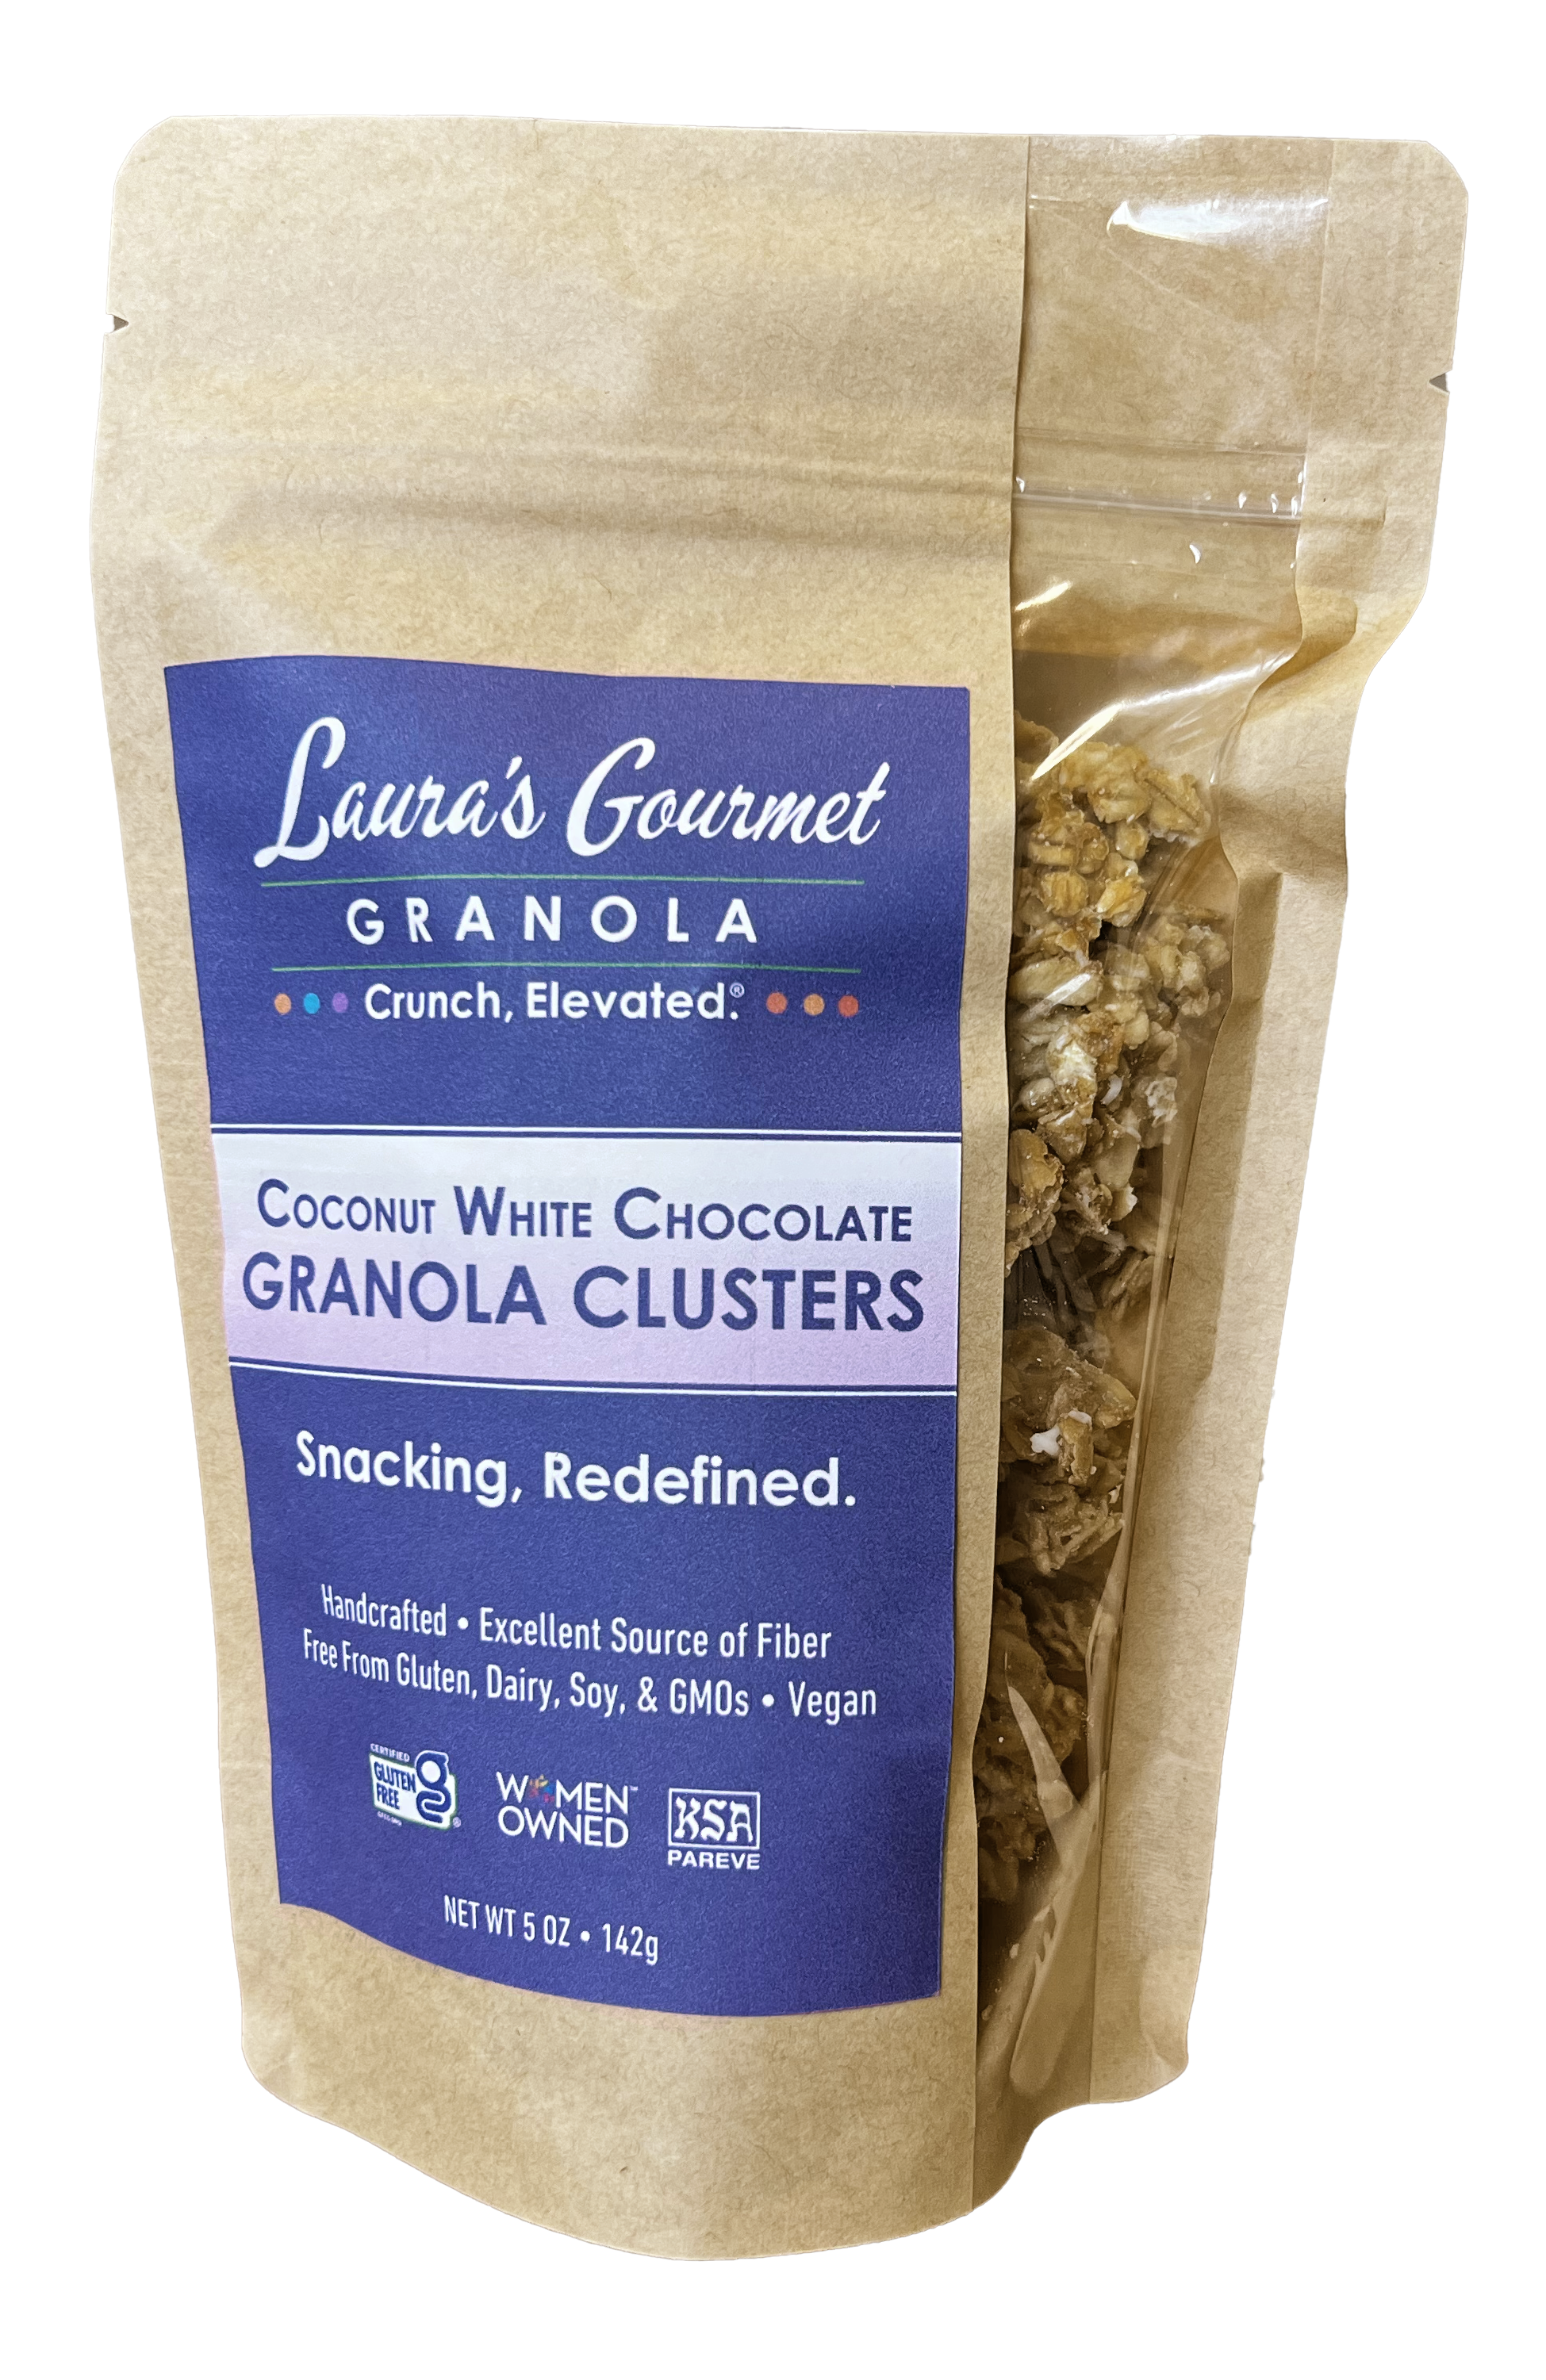 Coming Soon! Coconut White Chocolate Granola Clusters